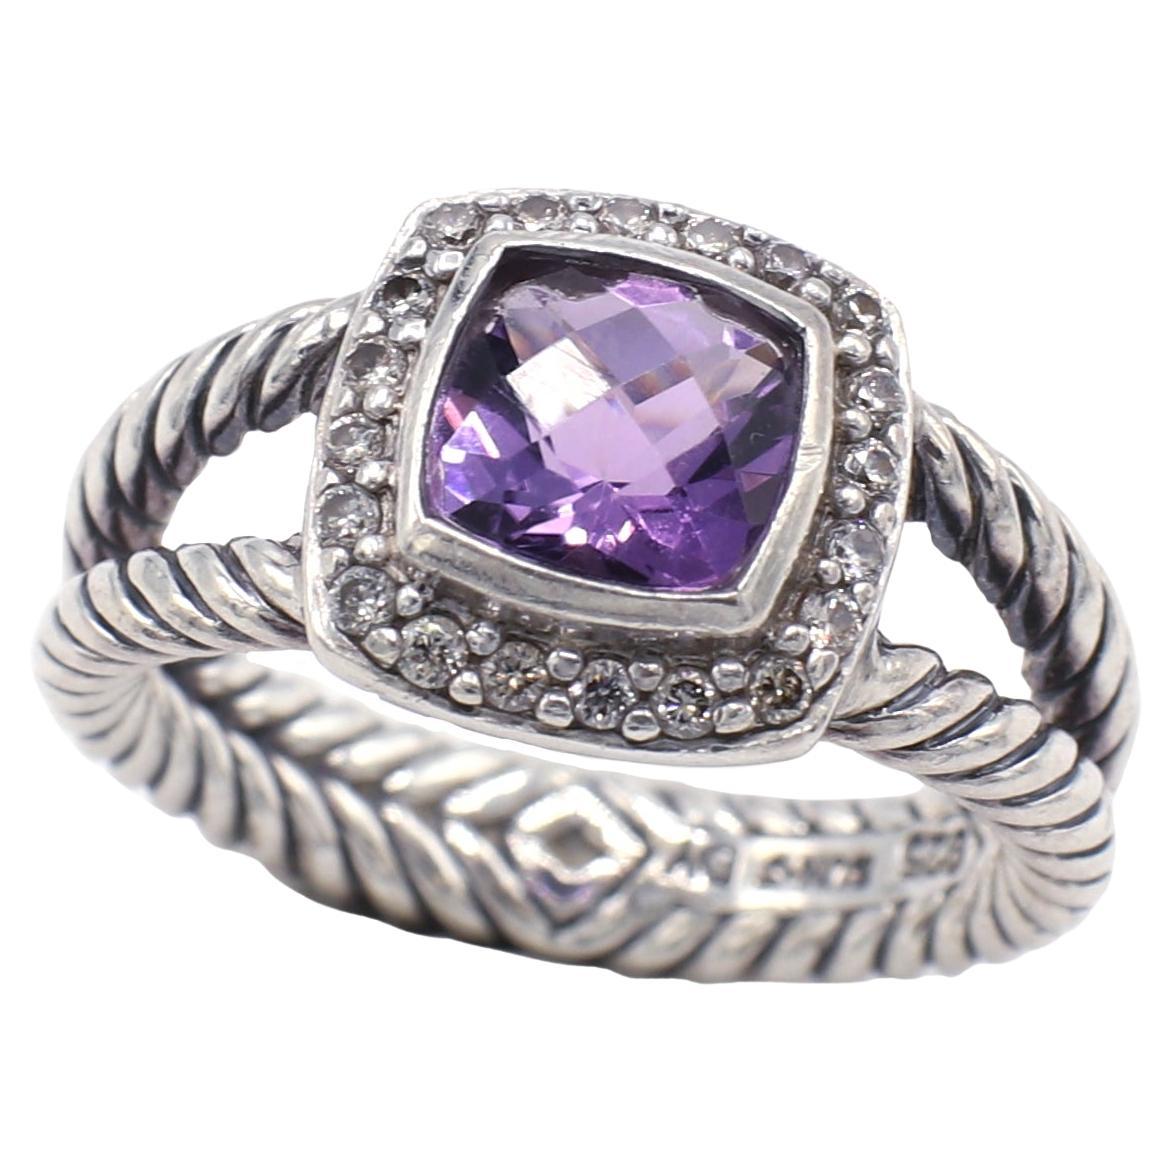 David Yurman Petite Albion Ring with Amethyst and Pavé Diamonds Sterling Silver